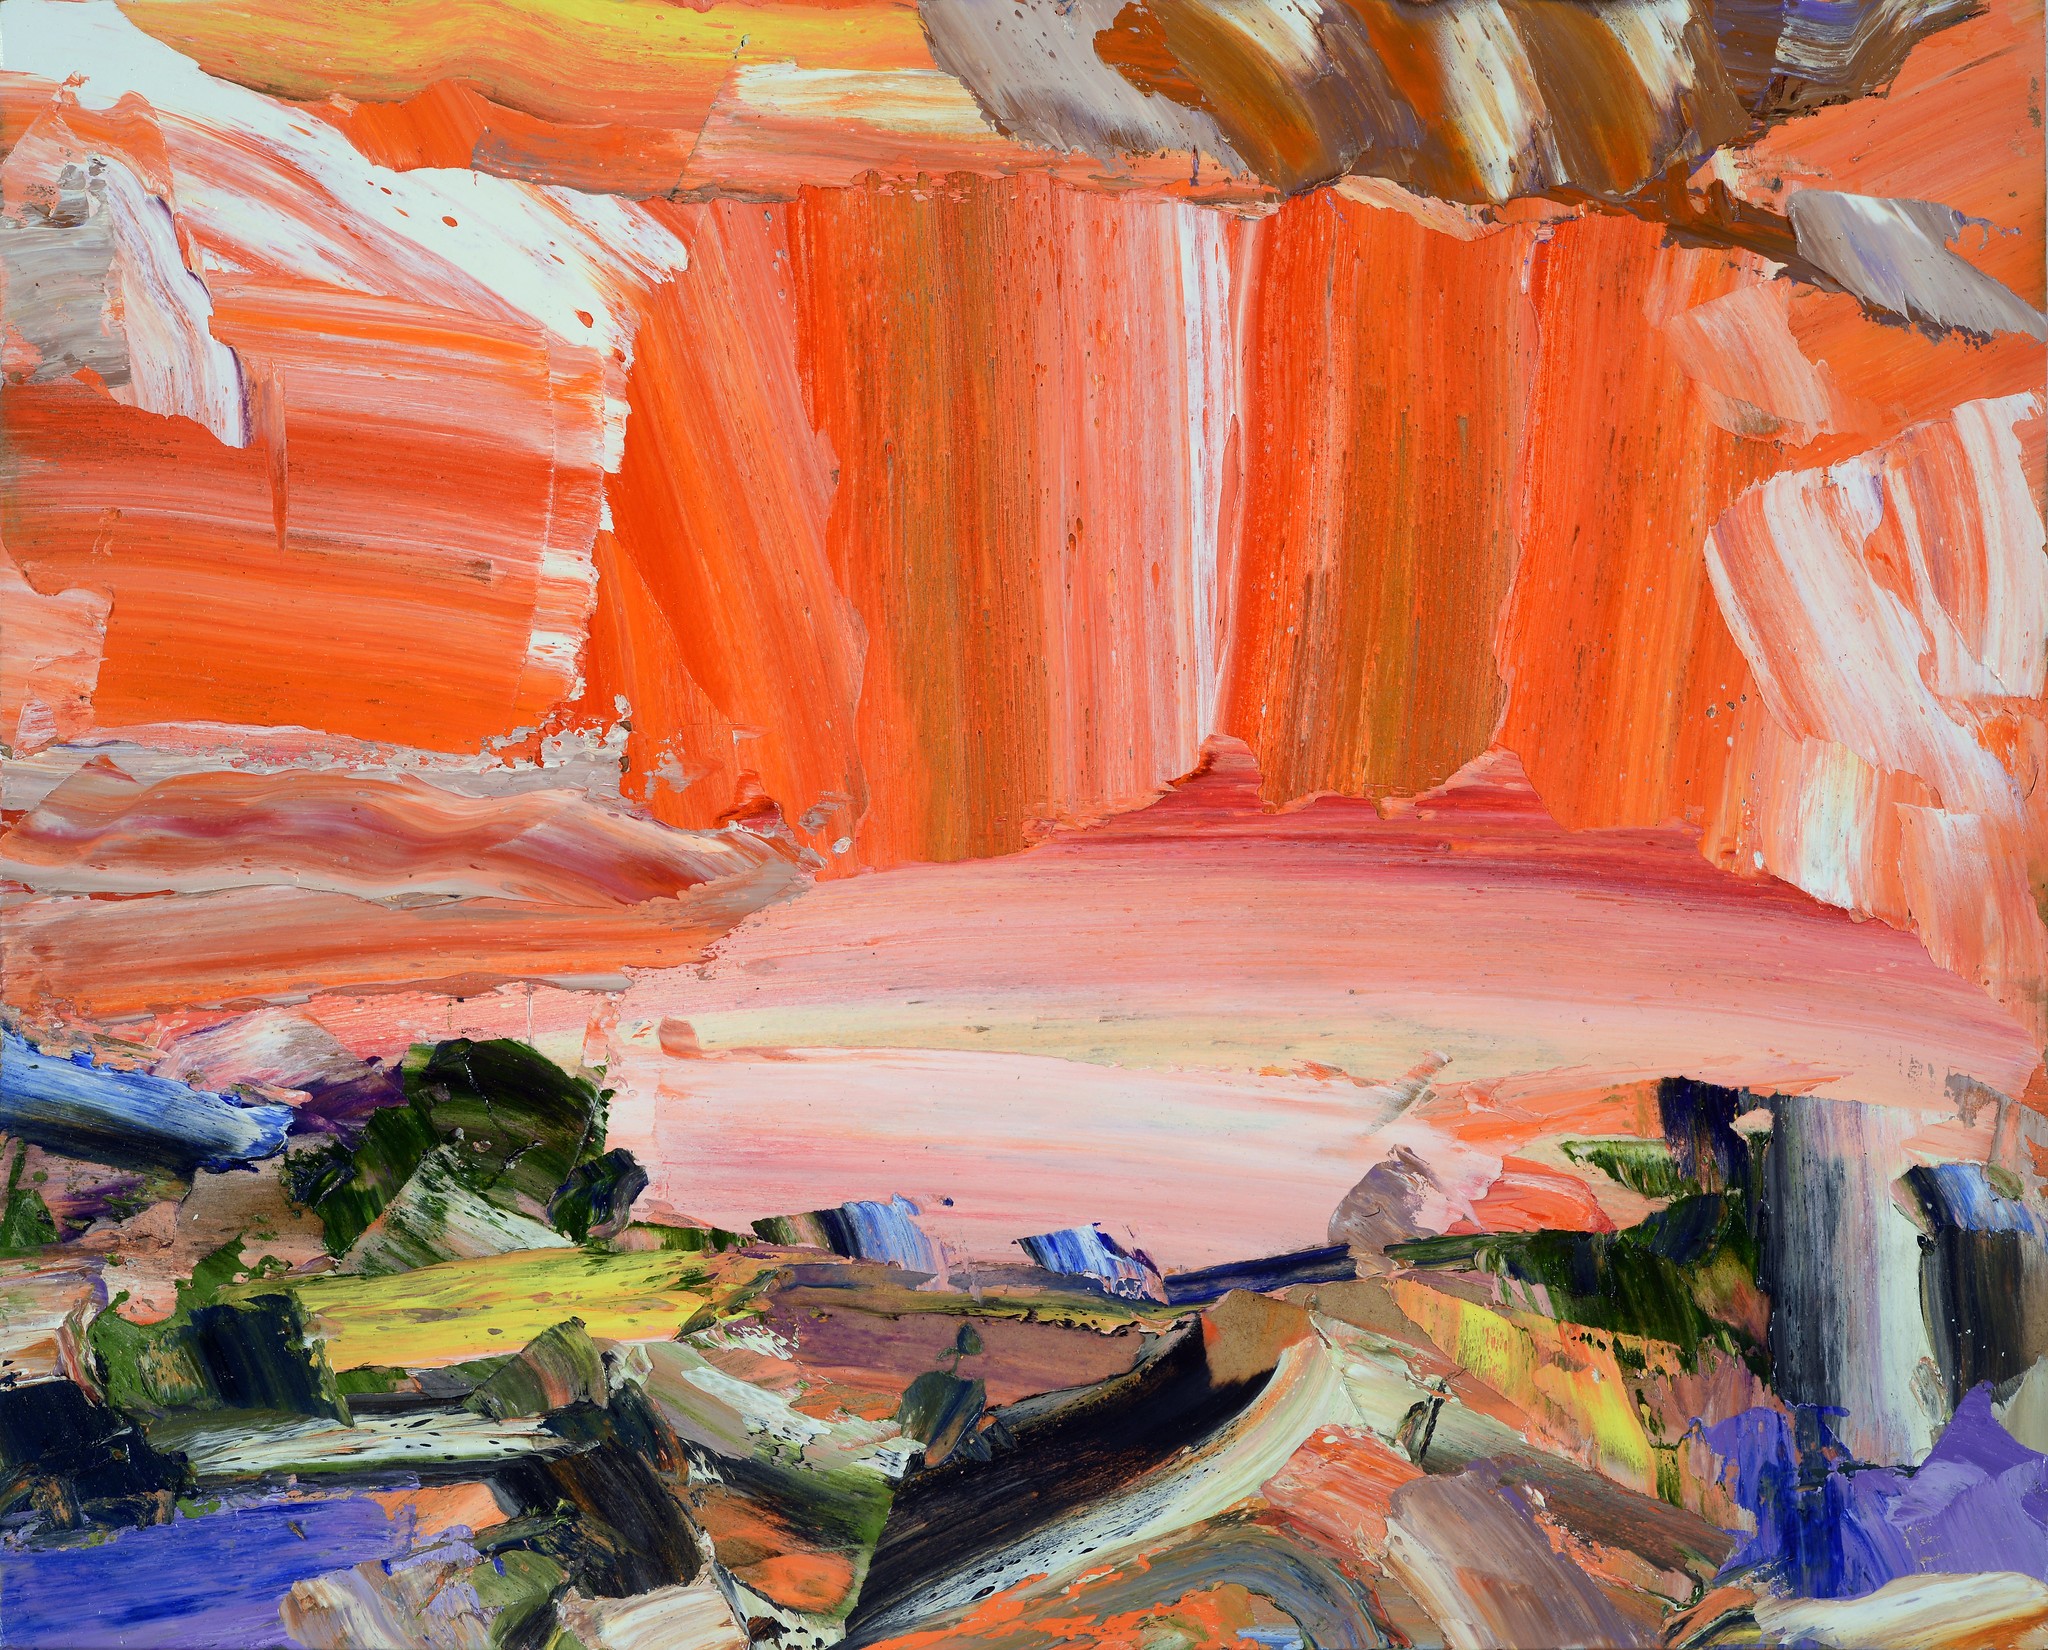 Landscape, abstracted, Ontario artist, chunky, red, fire, drama